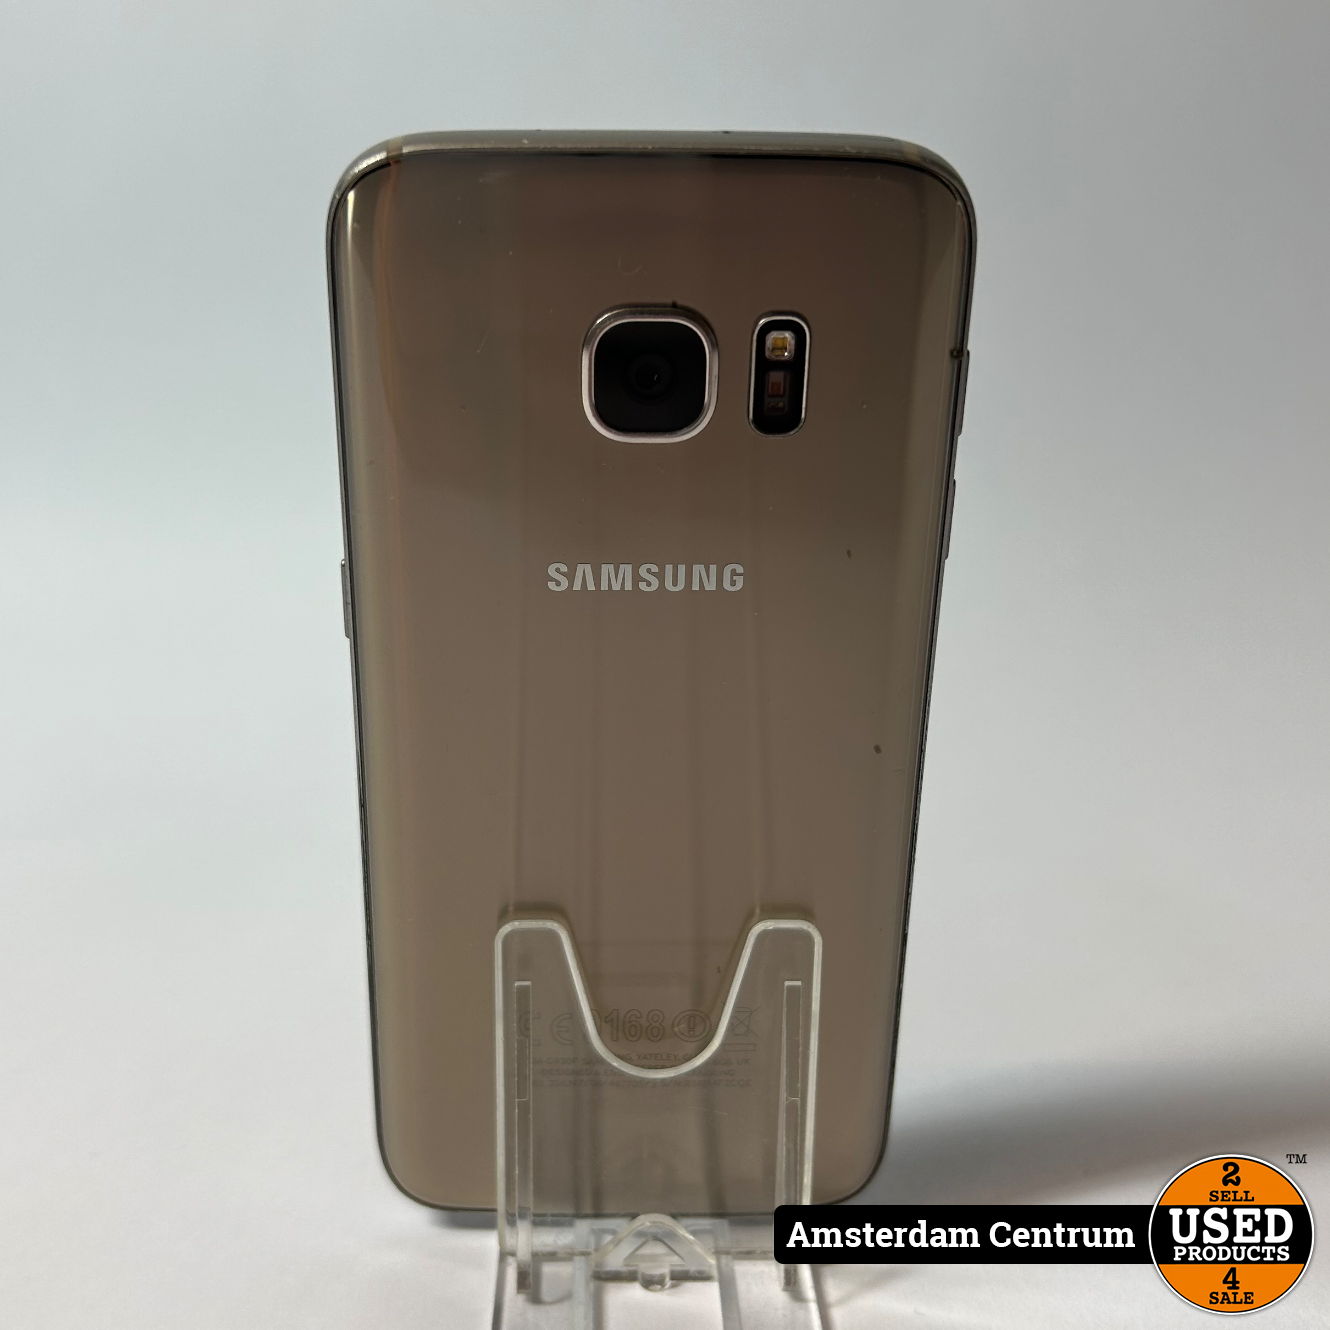 Samsung S7 32GB - Prima Staat Used Products Amsterdam Centrum